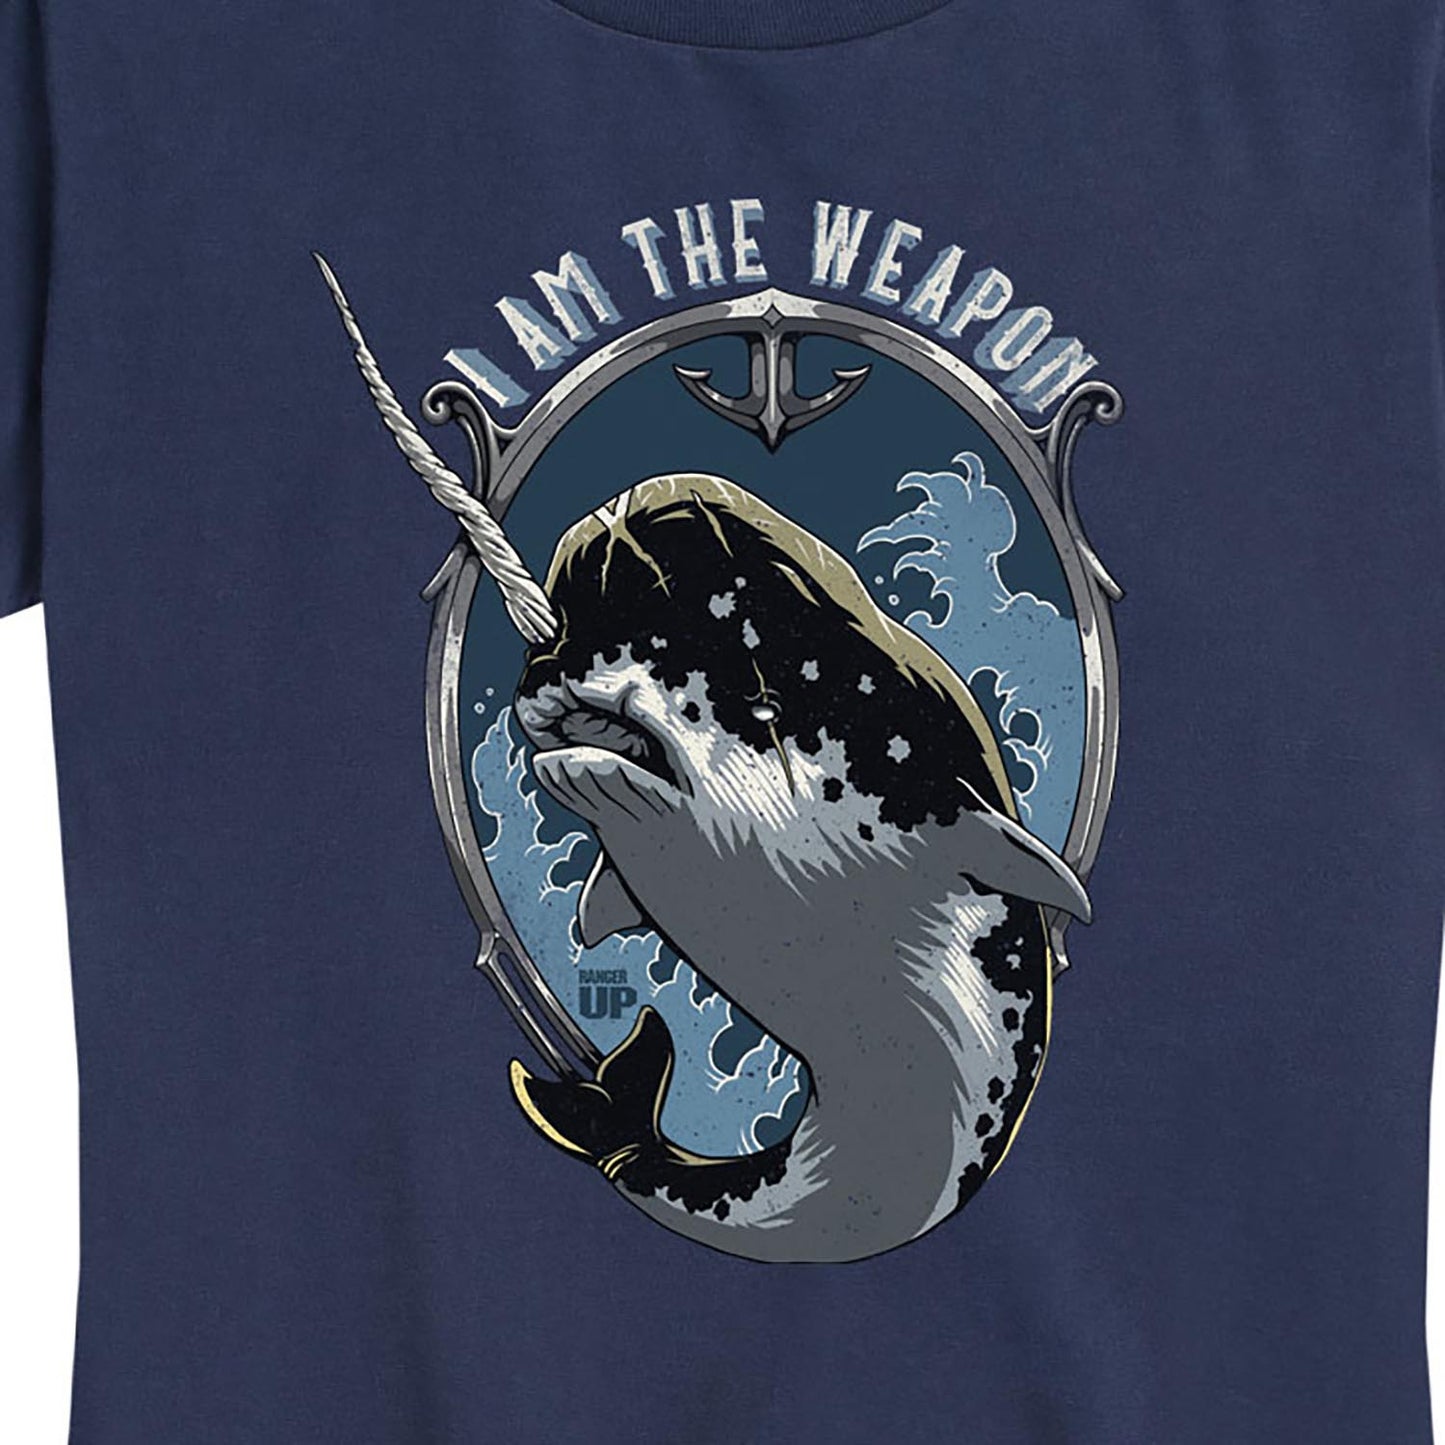 Women's Narwhal Tee